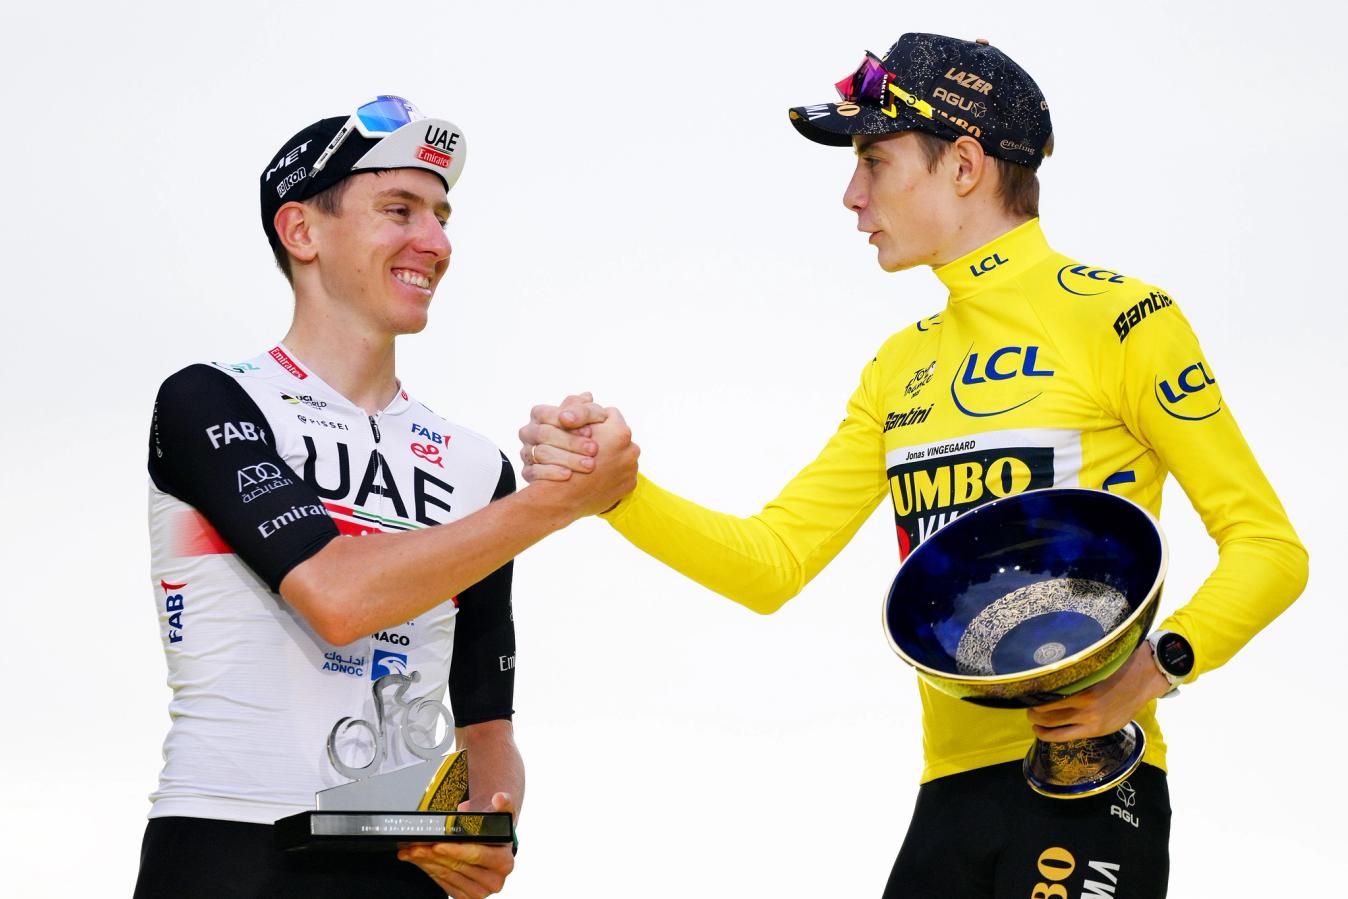 UAE Team Emirates placed Tadej Pogačar and Adam Yates on the Tour de France podium this year, but would love to reclaim the top step in 2024